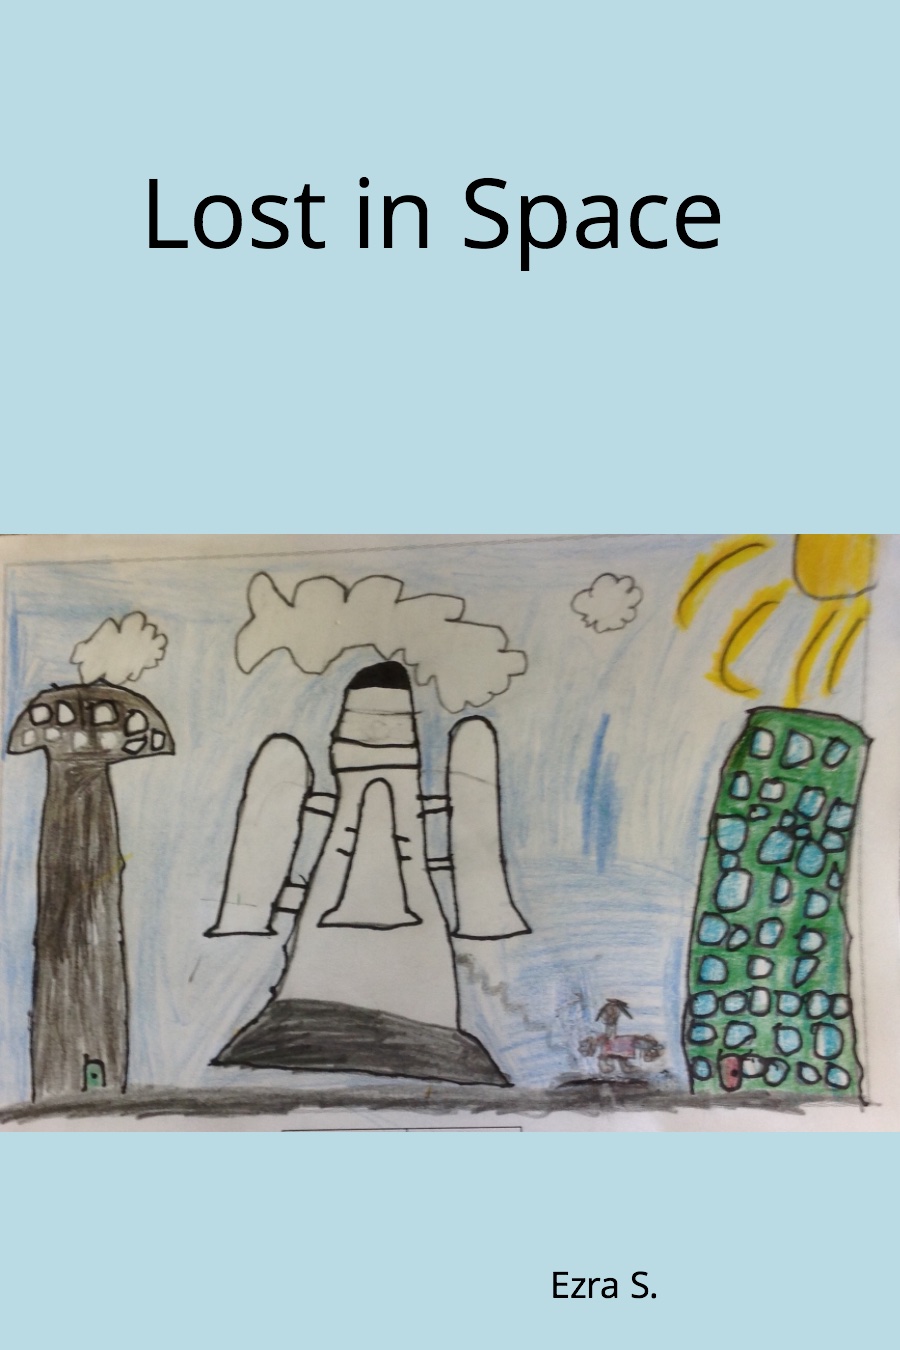 Lost In Space by Ezra S